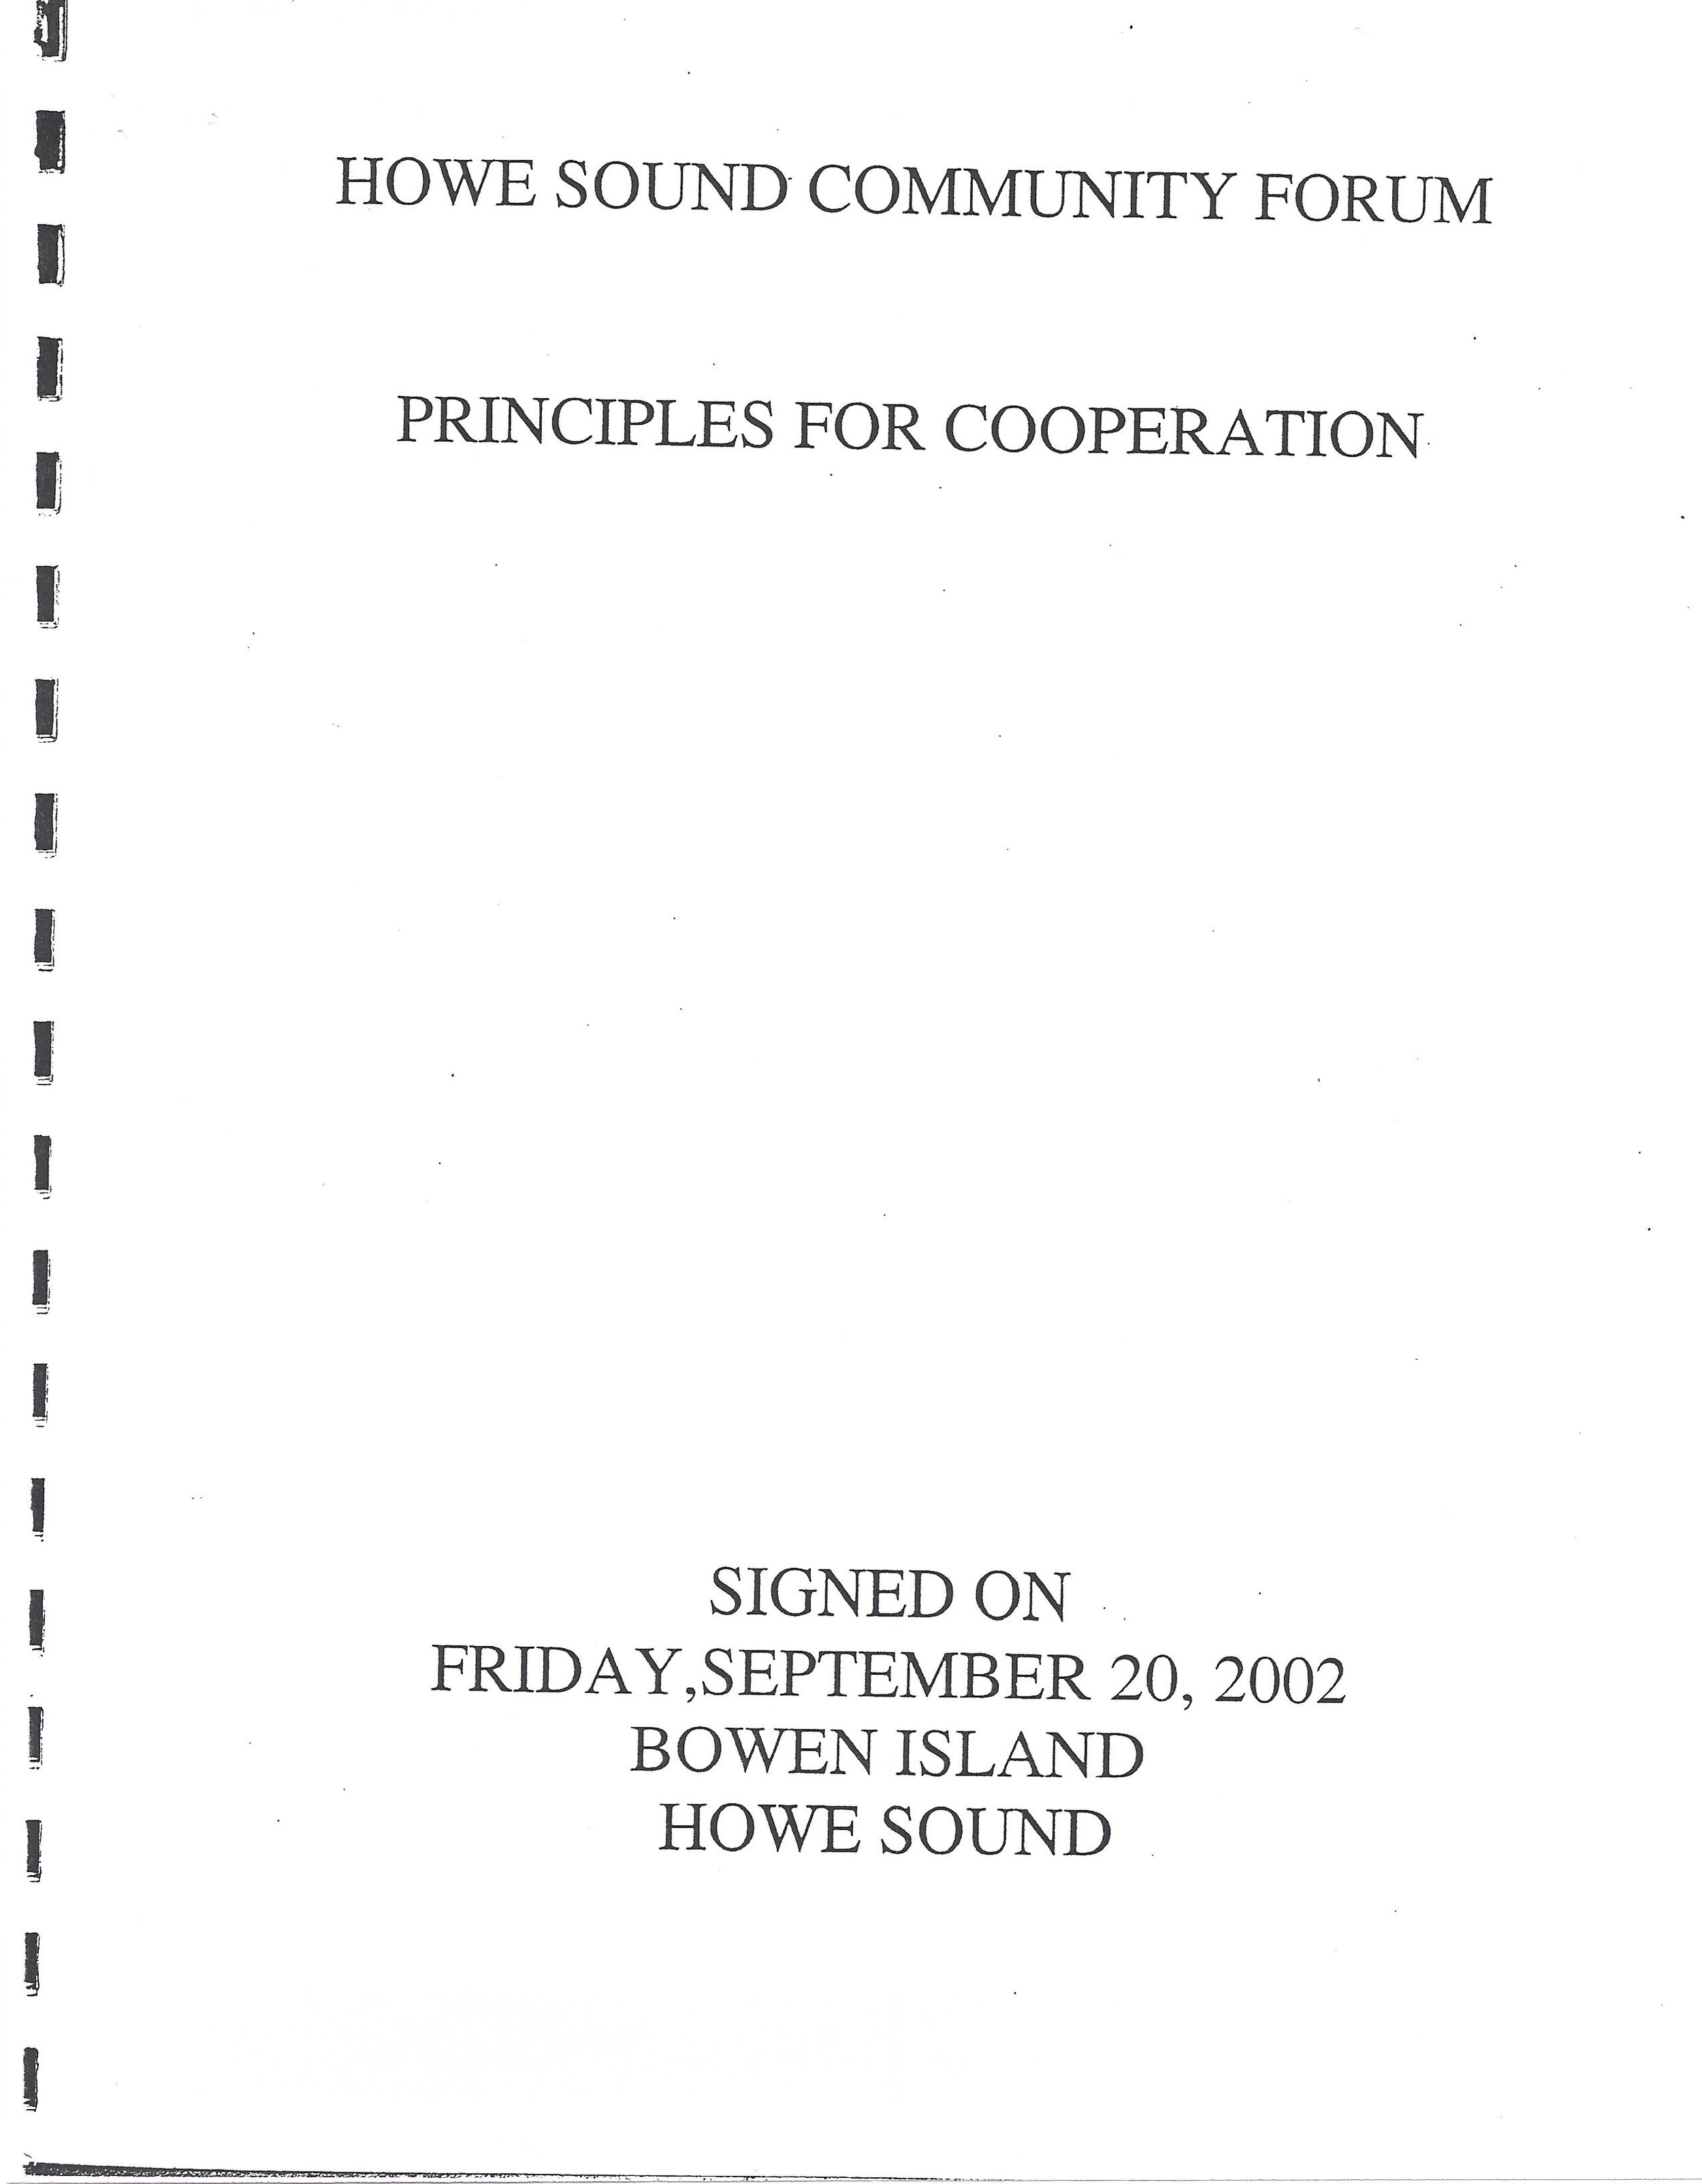 2002.09.20-Howe Sound Community Forum Principles For Cooperation, Signed_Page_1.jpg